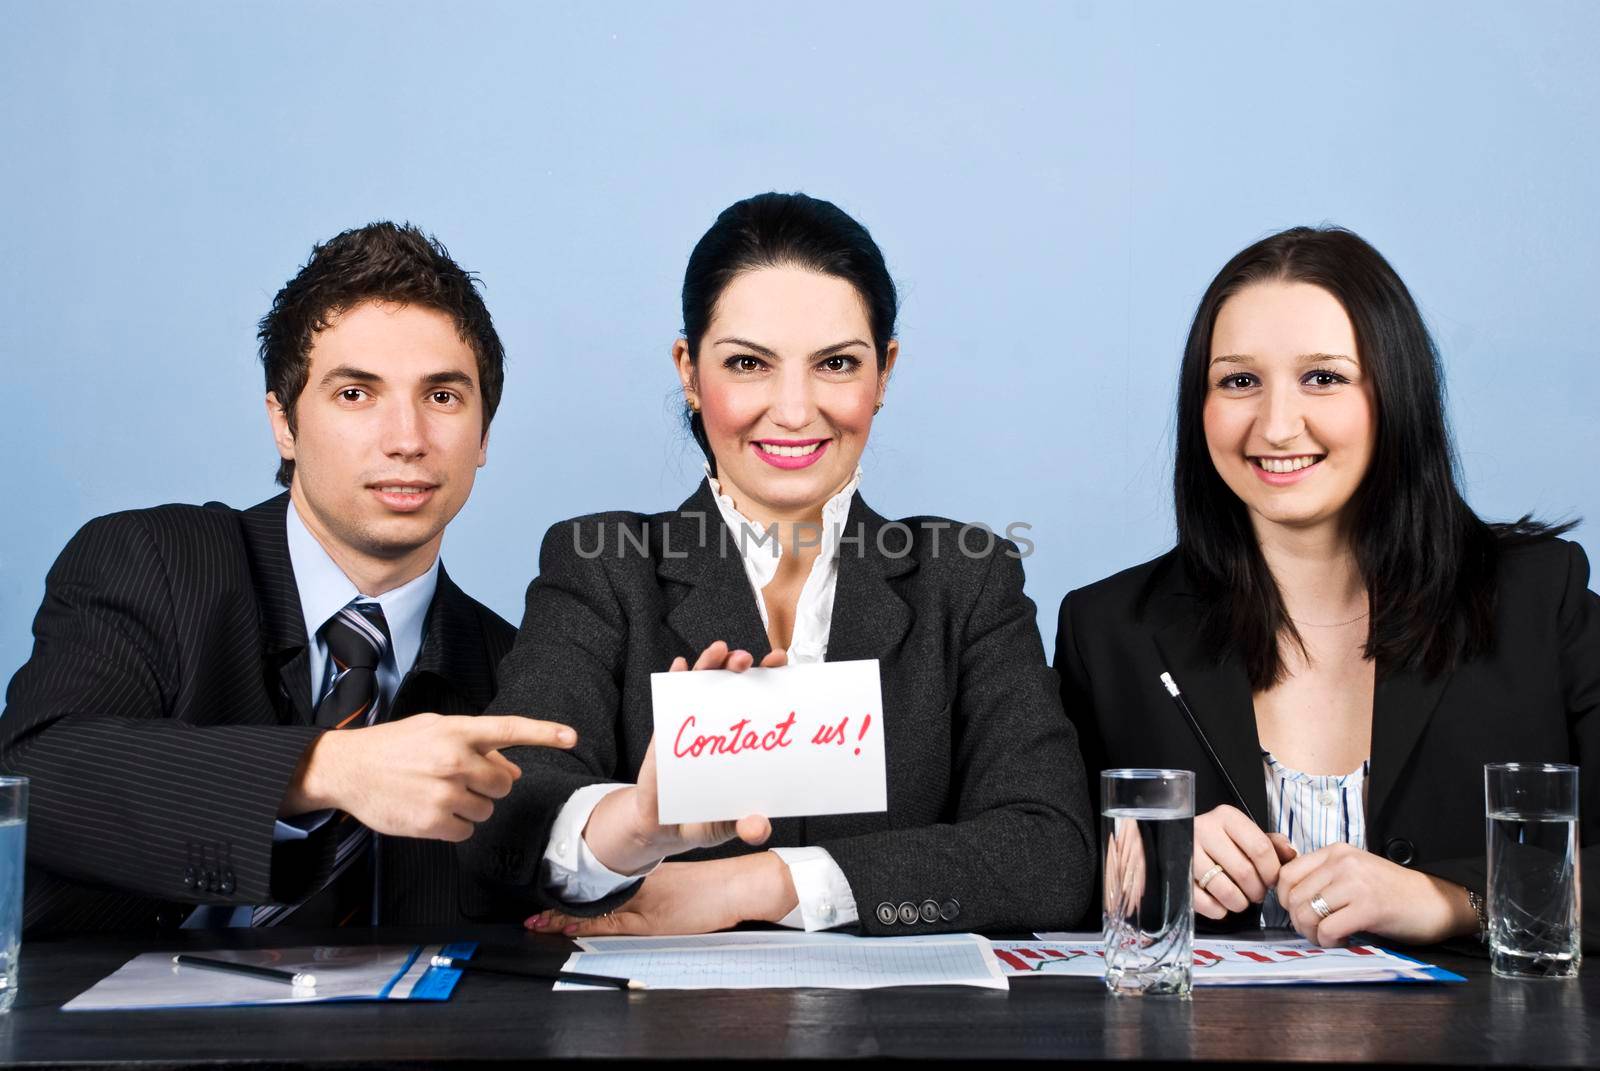 Group of three business people teamwork sitting in a line at table smiling and looking for you, a businesswoman holding a card with contact us handwritten displaying and her colleague man pointing to message